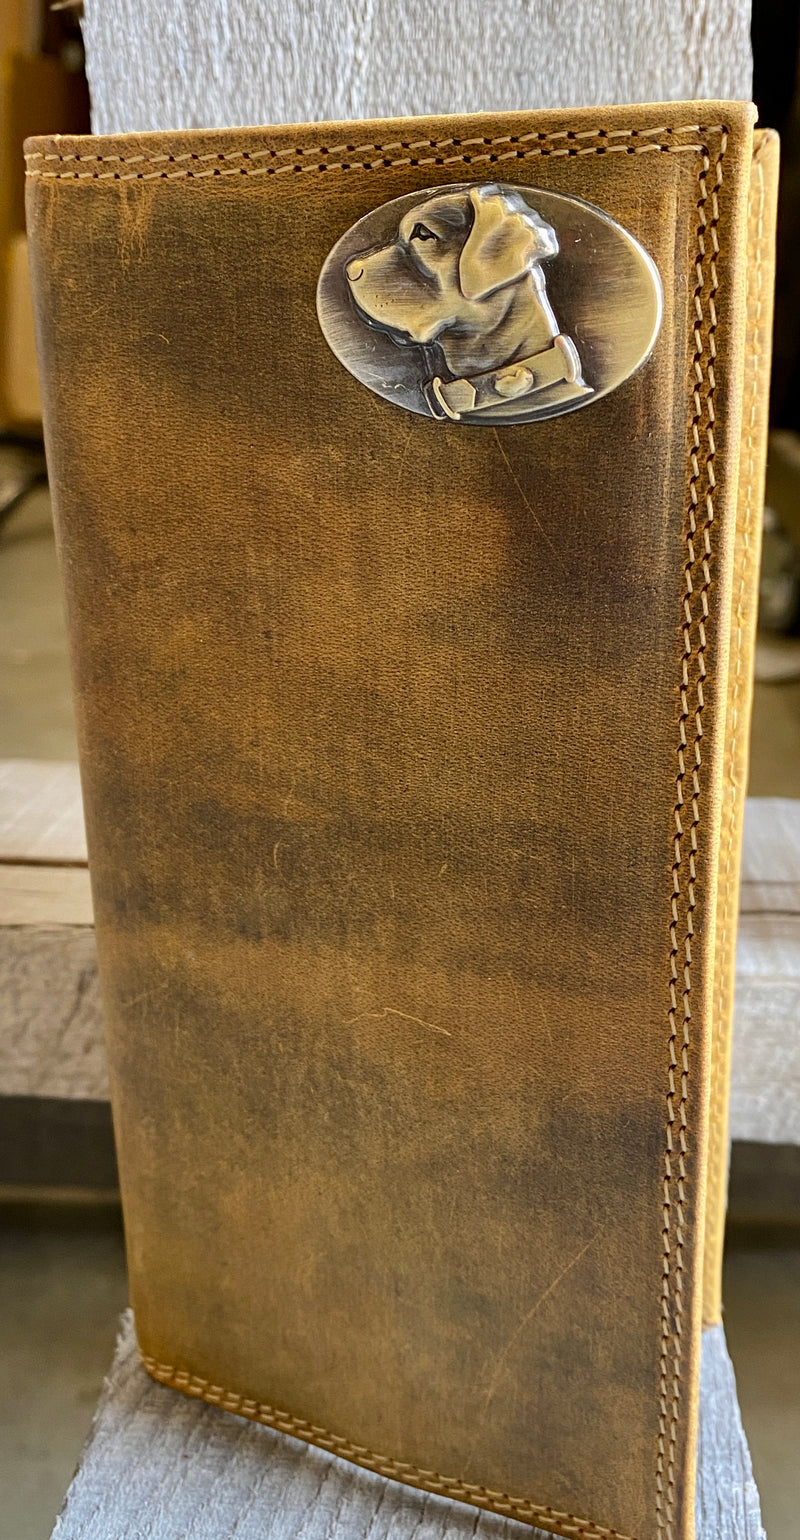 Zep Pro IWT4VINT-Lab Concho Vintage Brown “Crazy Horse” Leather Tall Wallet